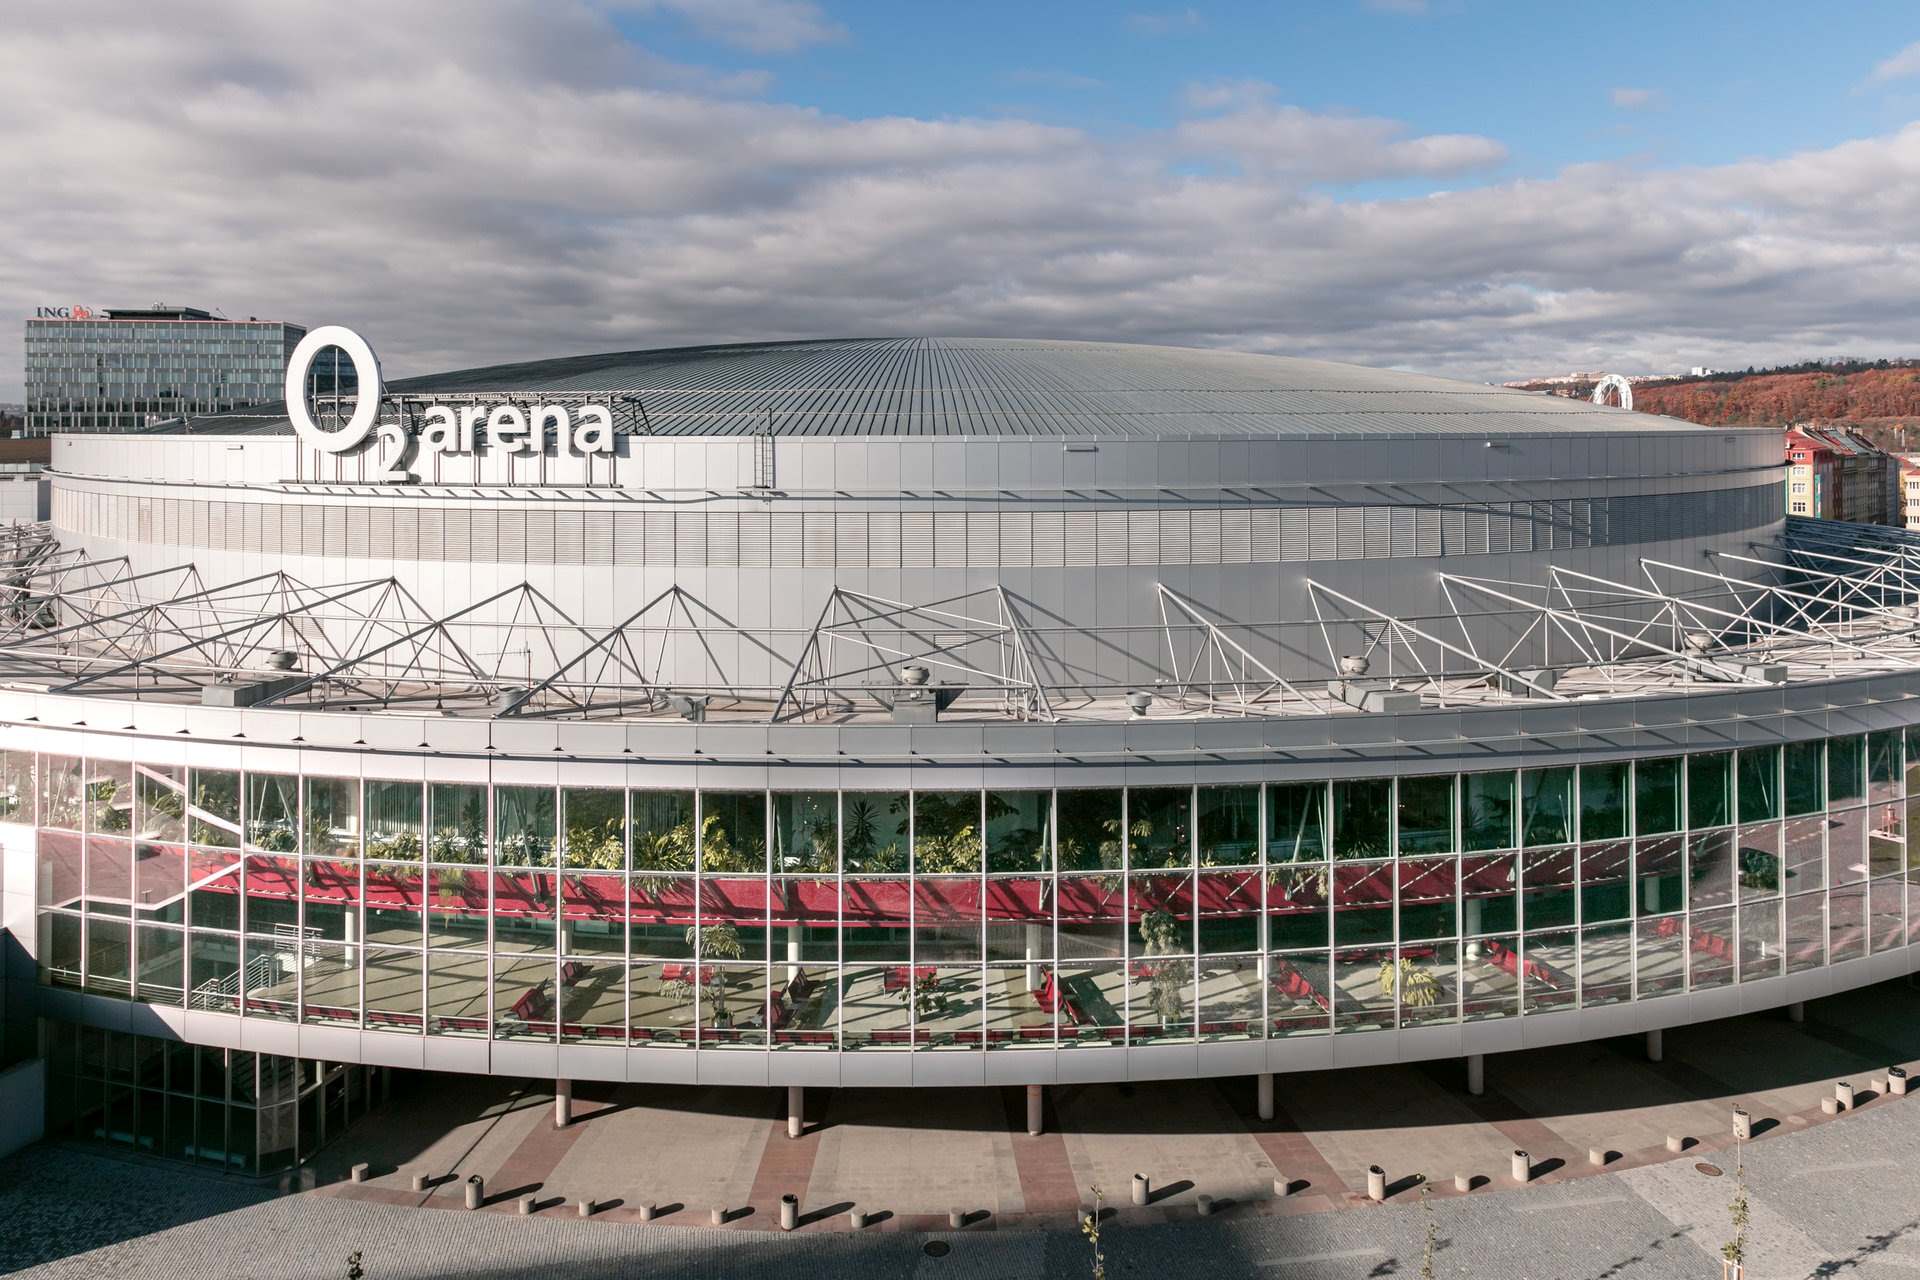 14-astonishing-facts-about-the-o2-arena-prague